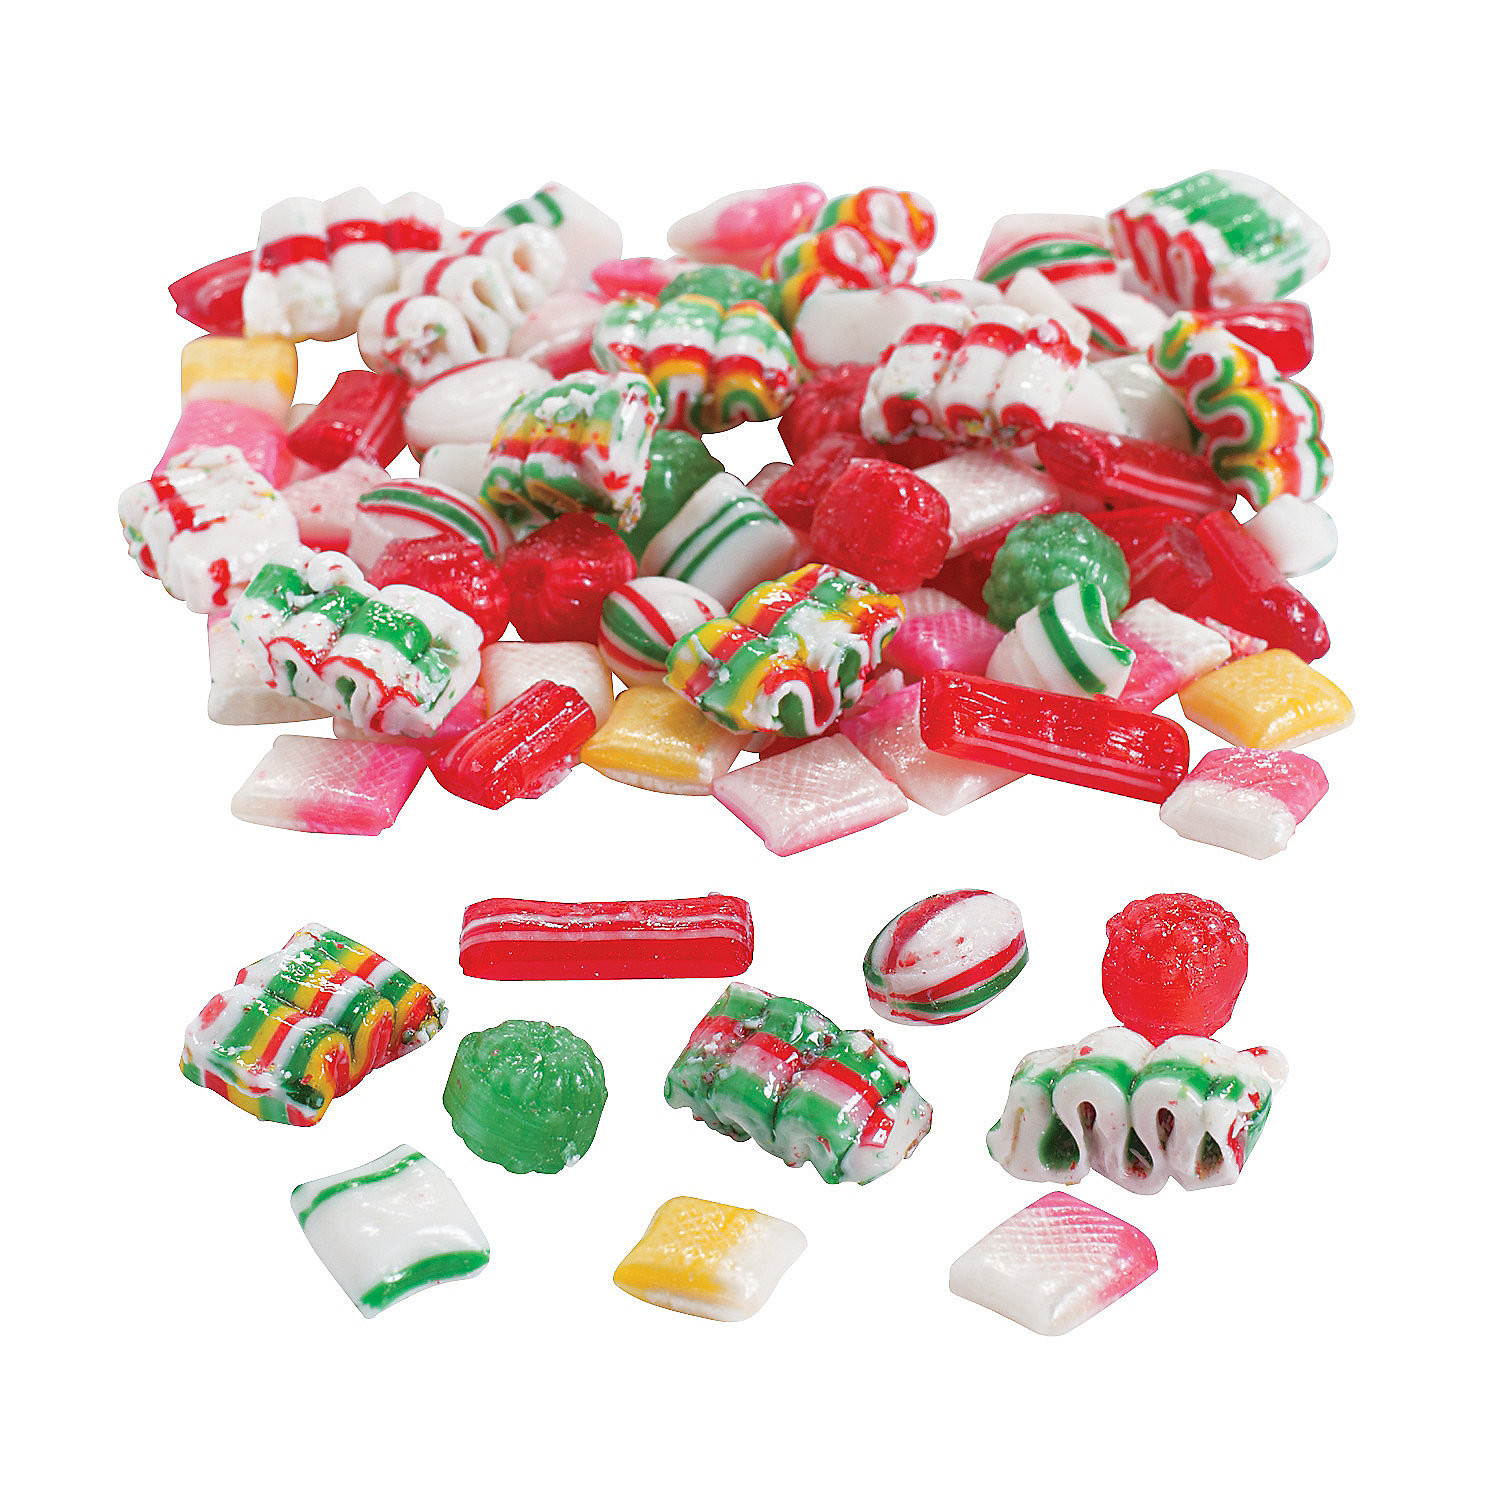 Old Fashion Christmas Candy
 Brach’s Holiday Old Fashioned Candy Mix Oriental